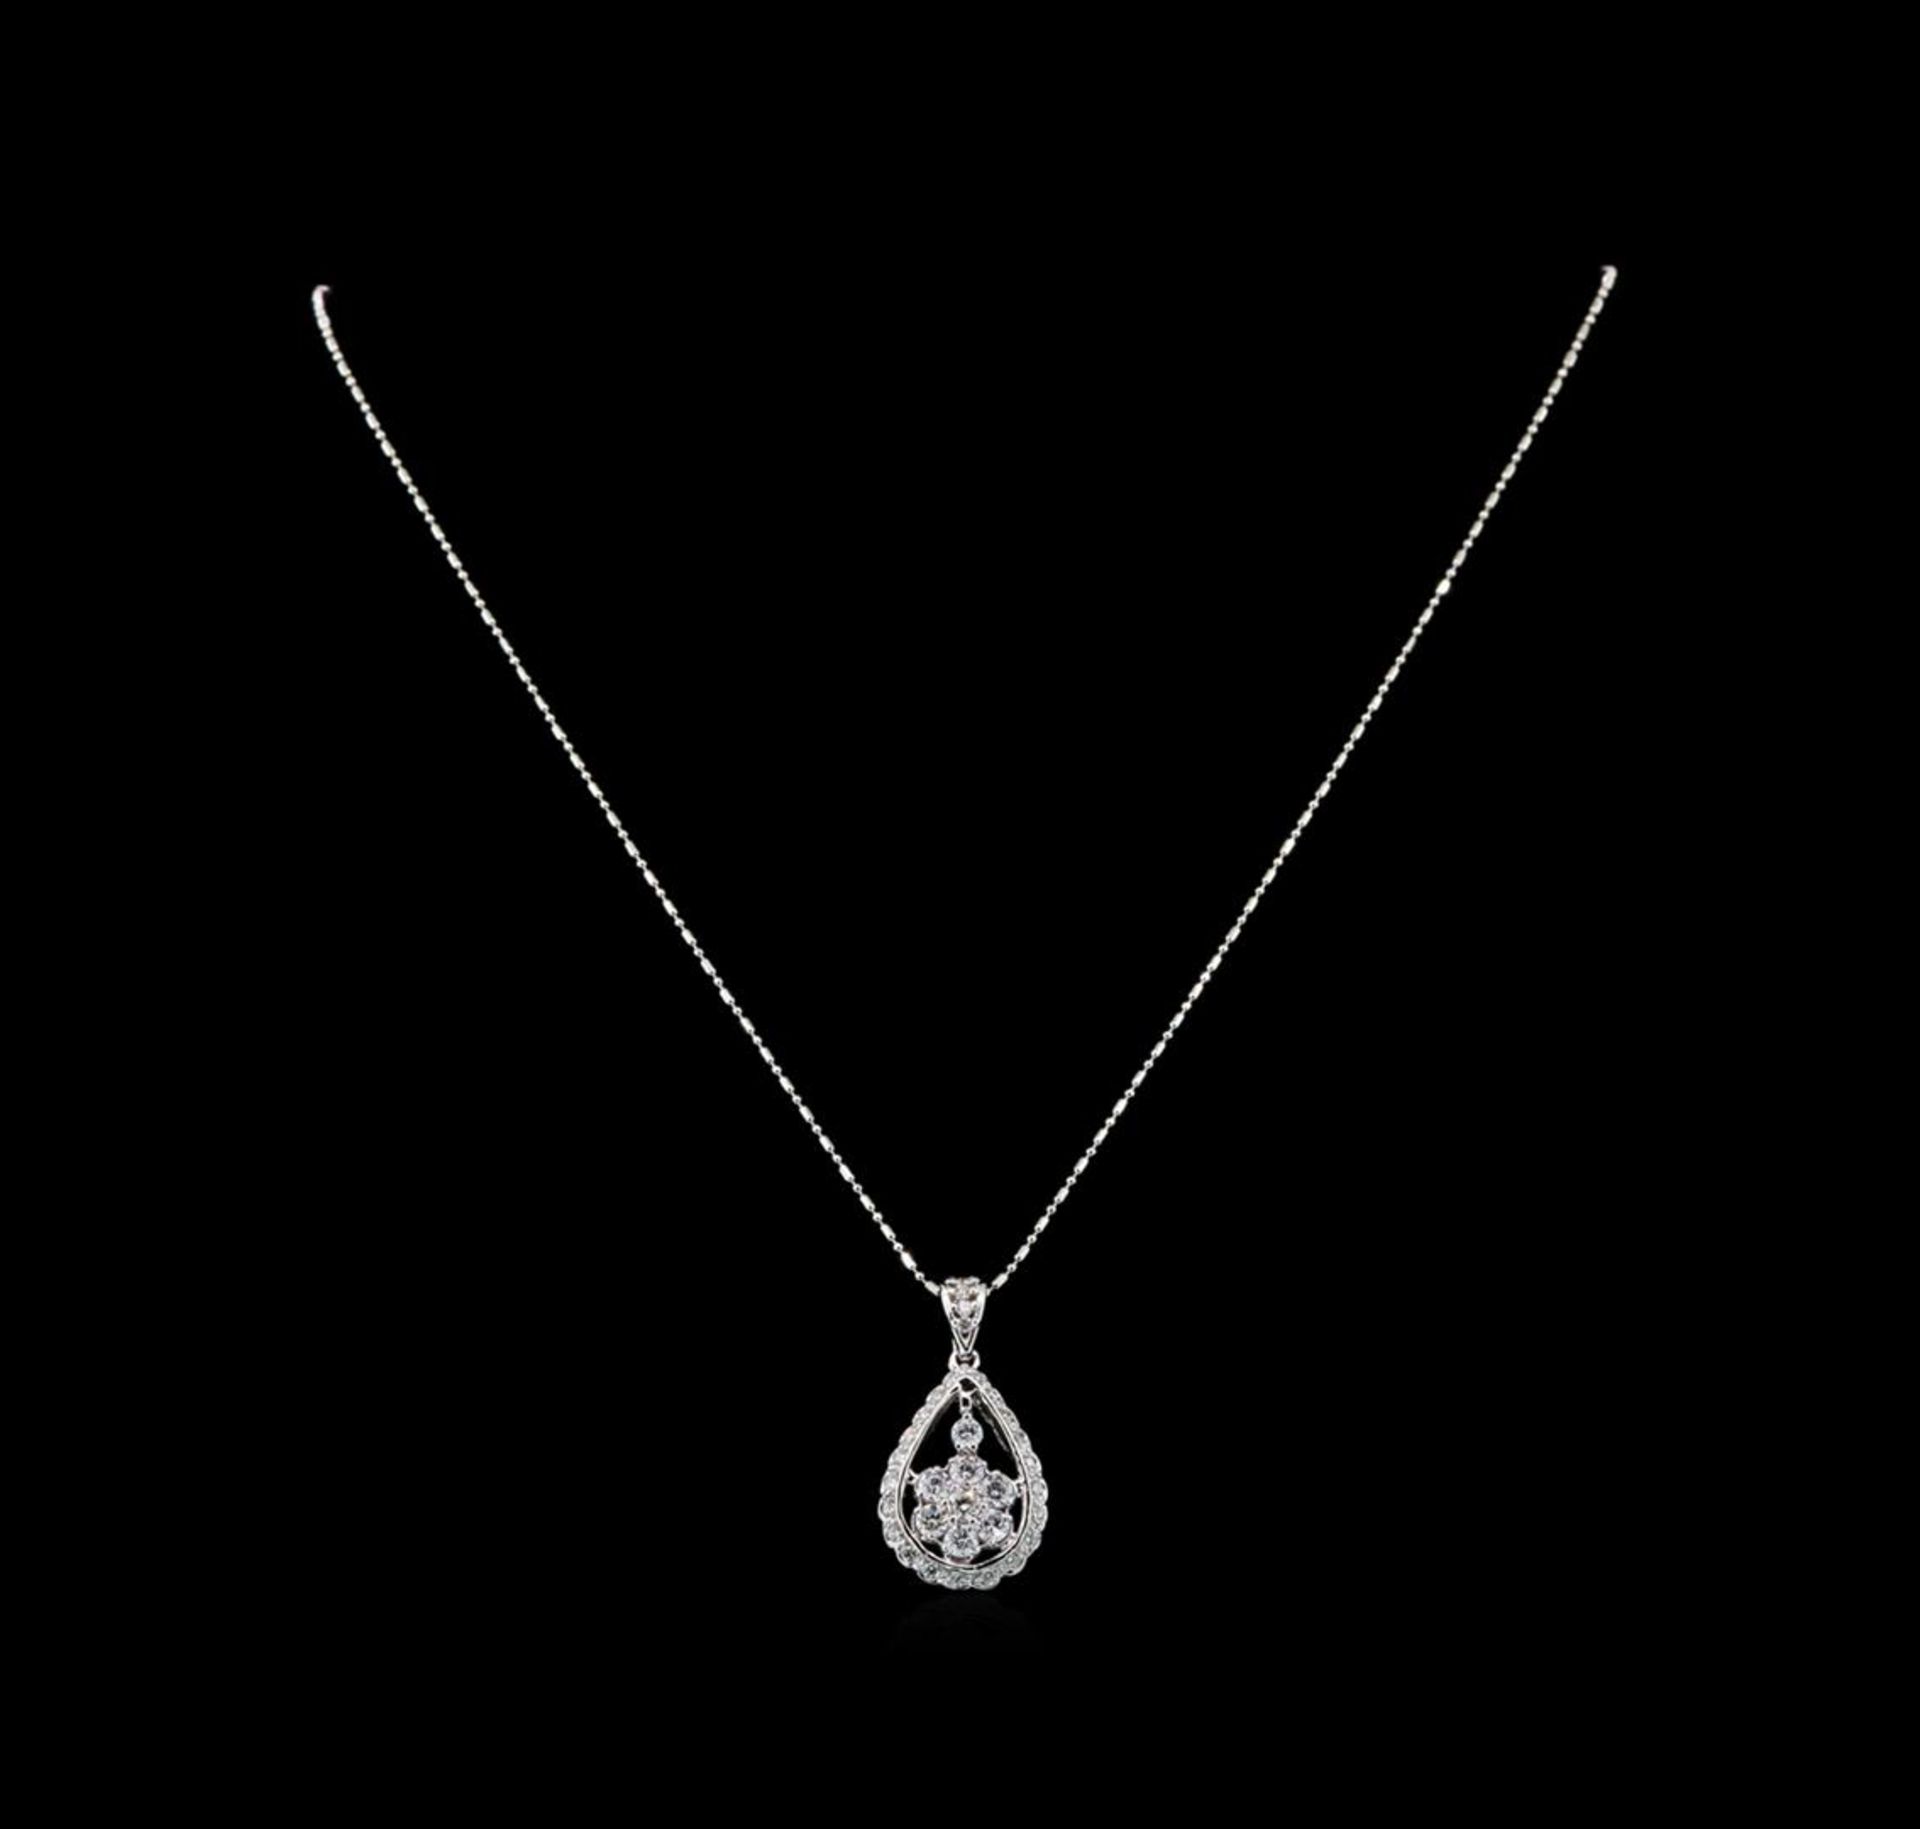 14KT White Gold 1.11 ctw Diamond Pendant With Chain - Image 2 of 3